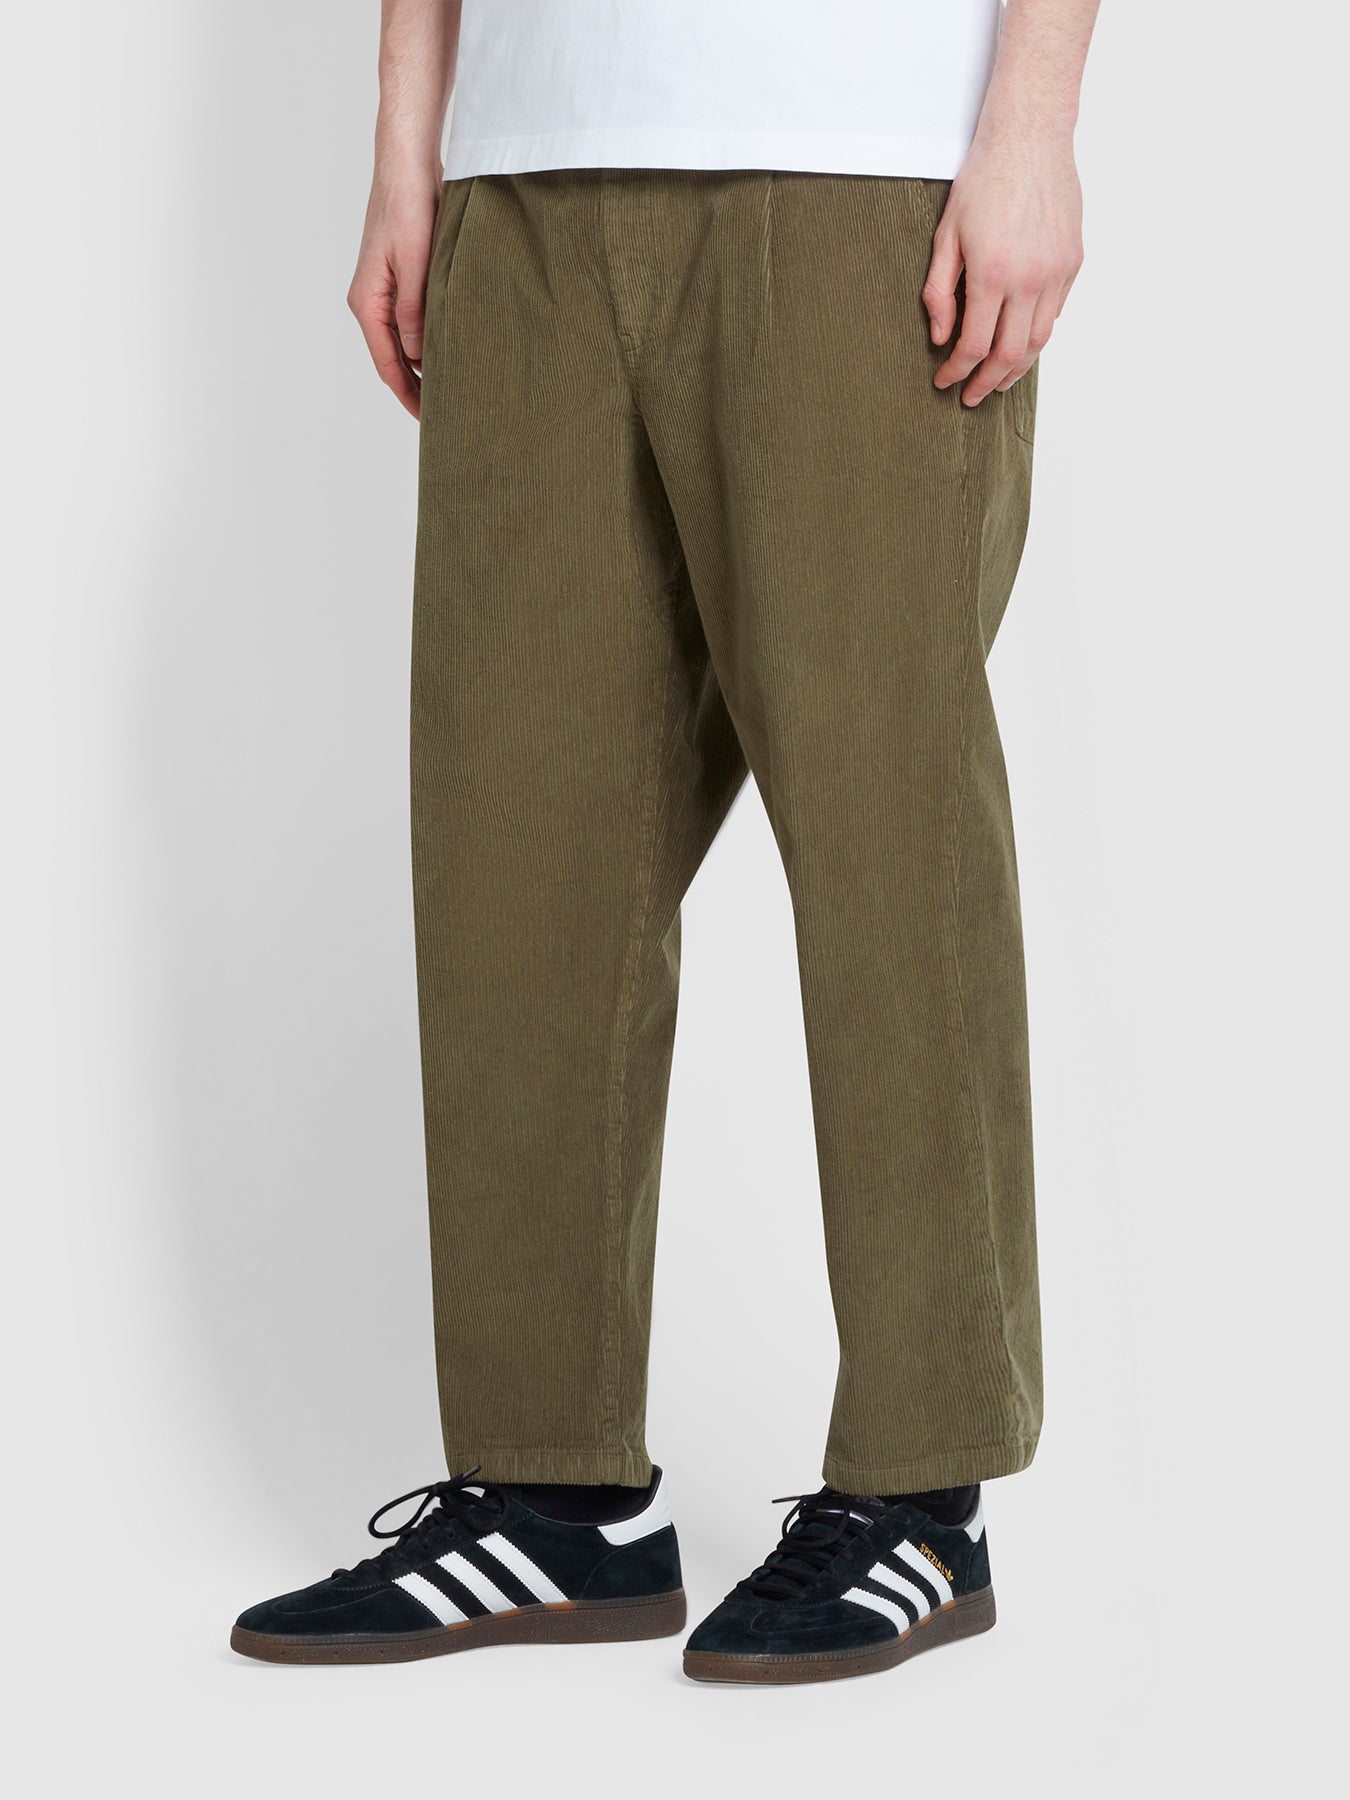 View Hawtin Tapered Fit Drawstring Cord Trousers In Olive Green information